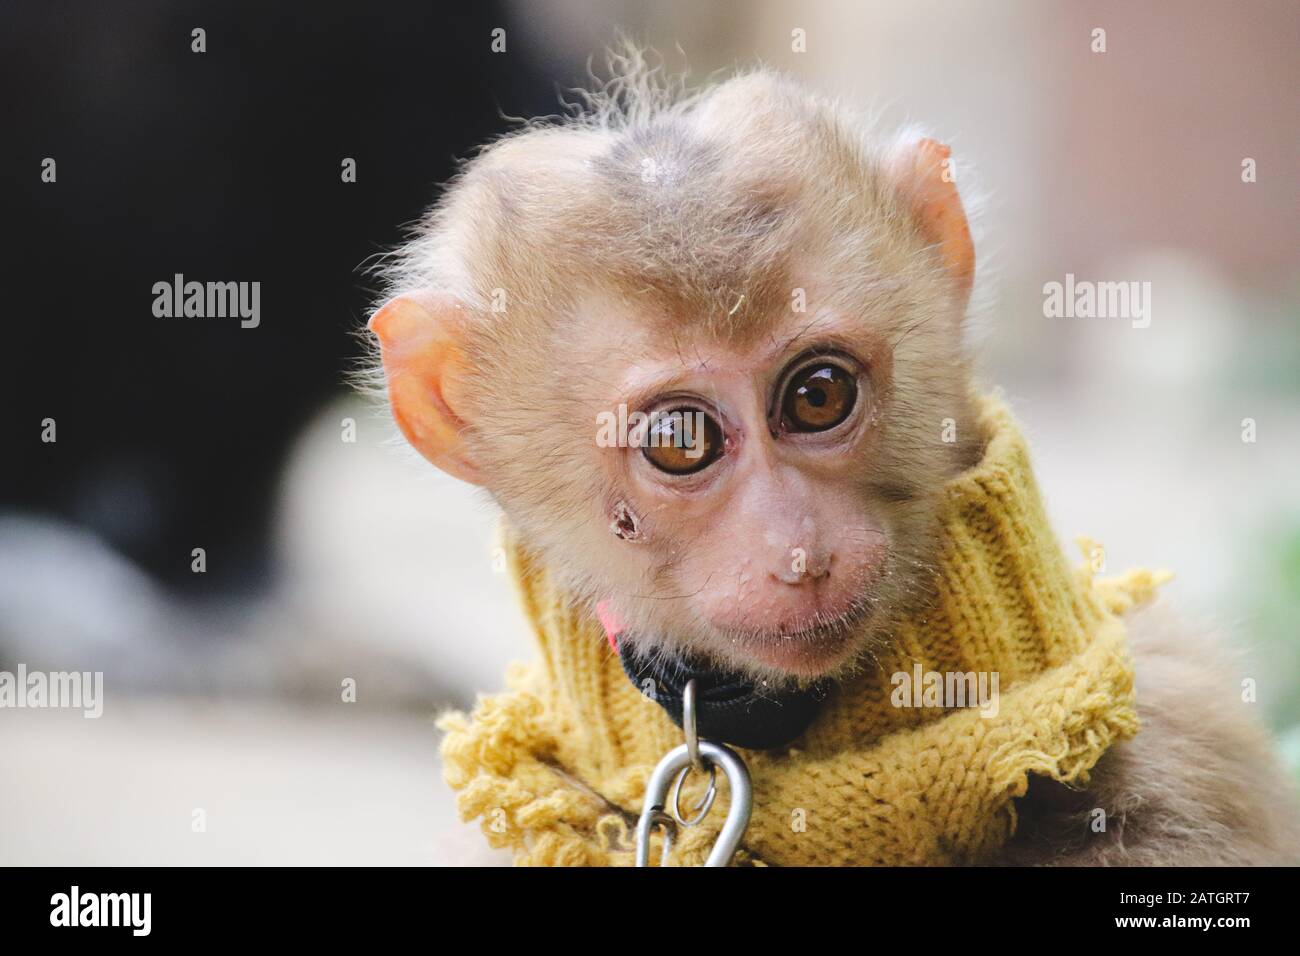 A baby monkey traditionally kept chained as pets for good luck according to Vietnamese Culture and Tradition Stock Photo